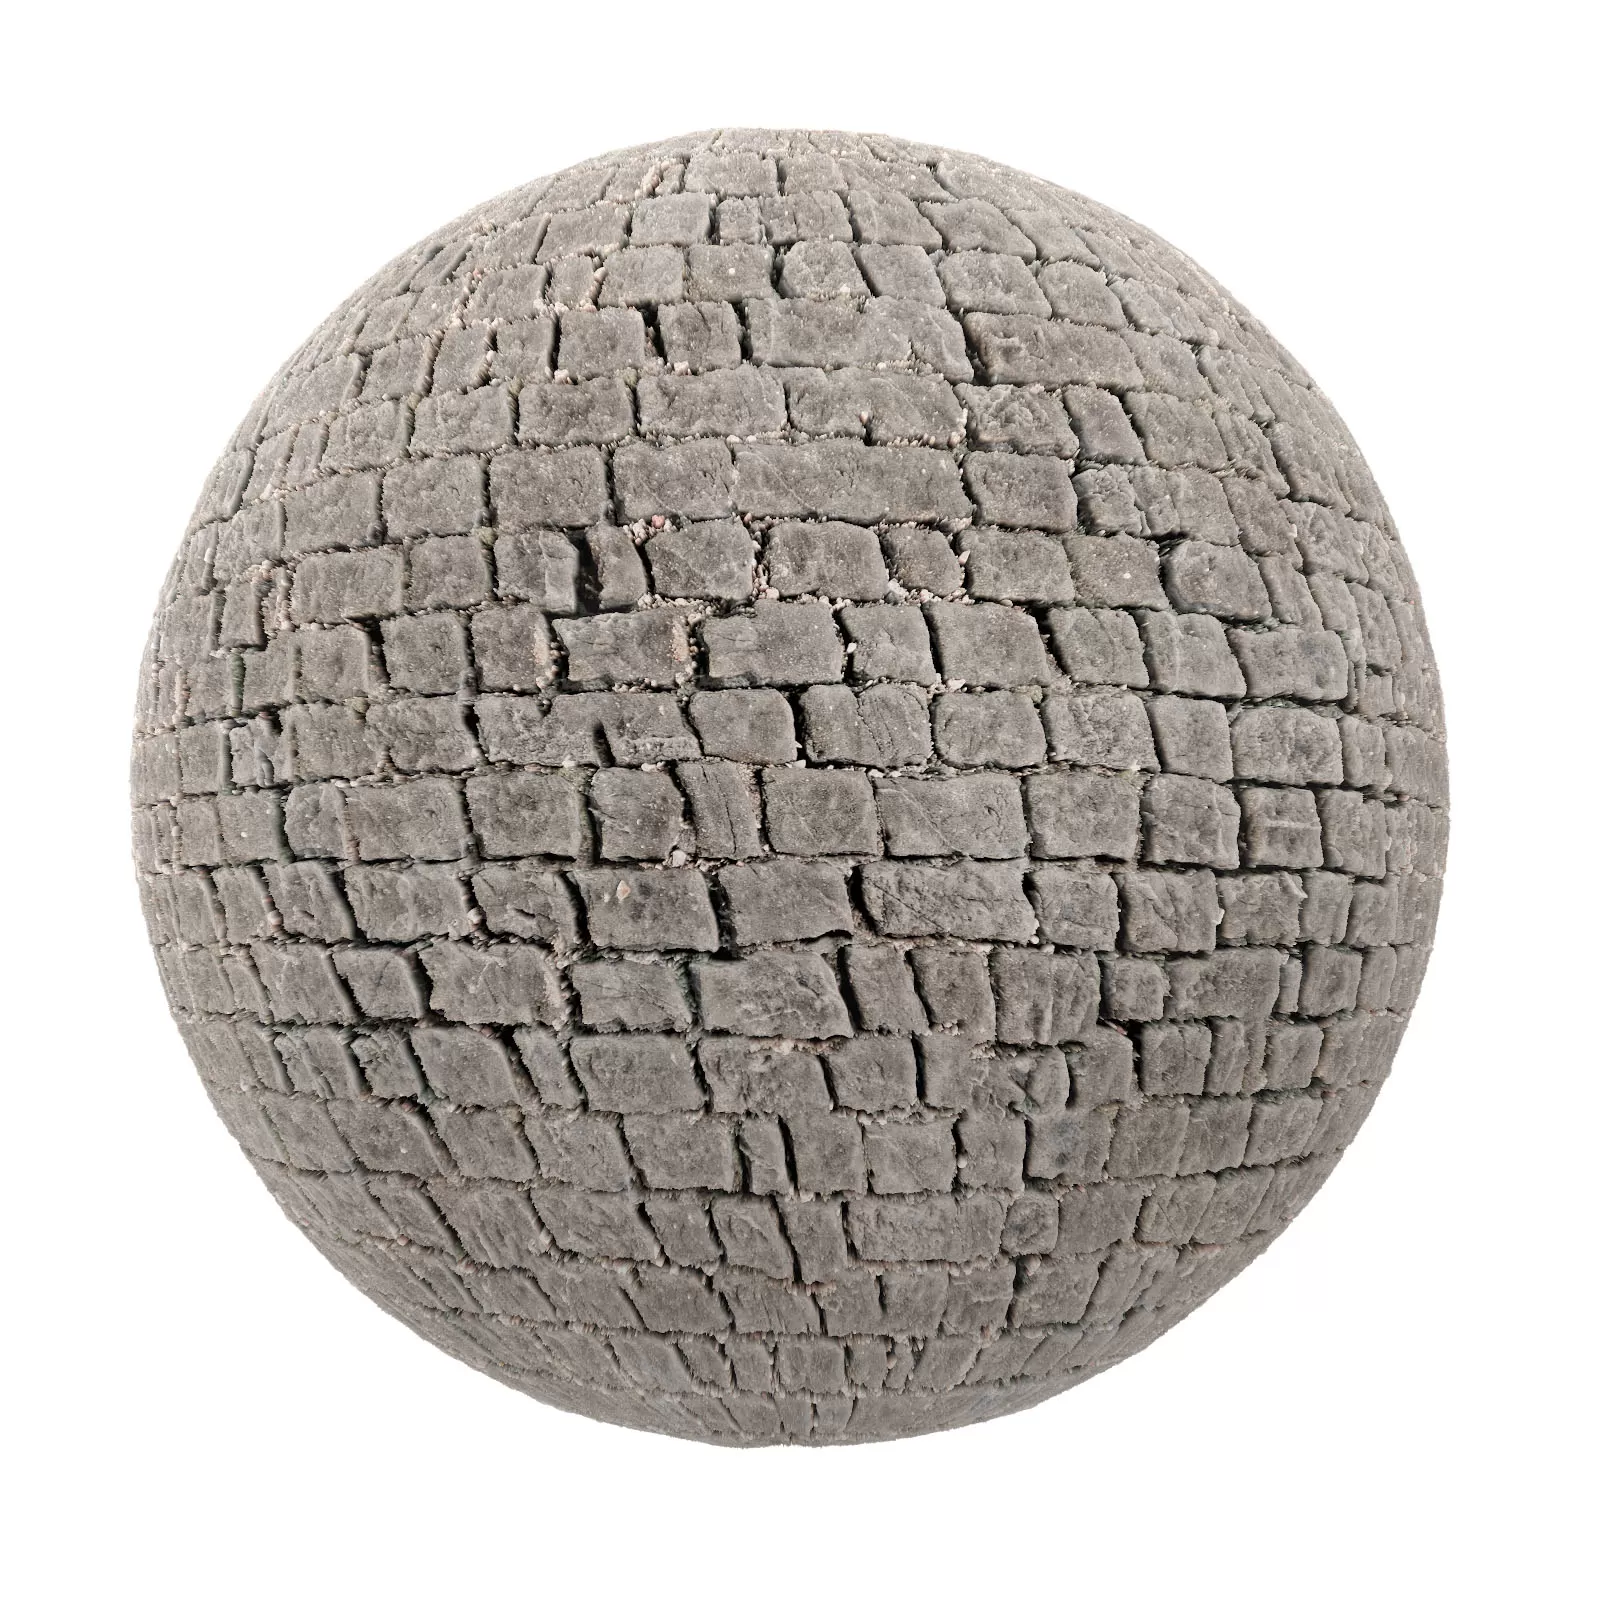 PBR CGAXIS TEXTURES – PAVEMENTS – Stone Pavement 21